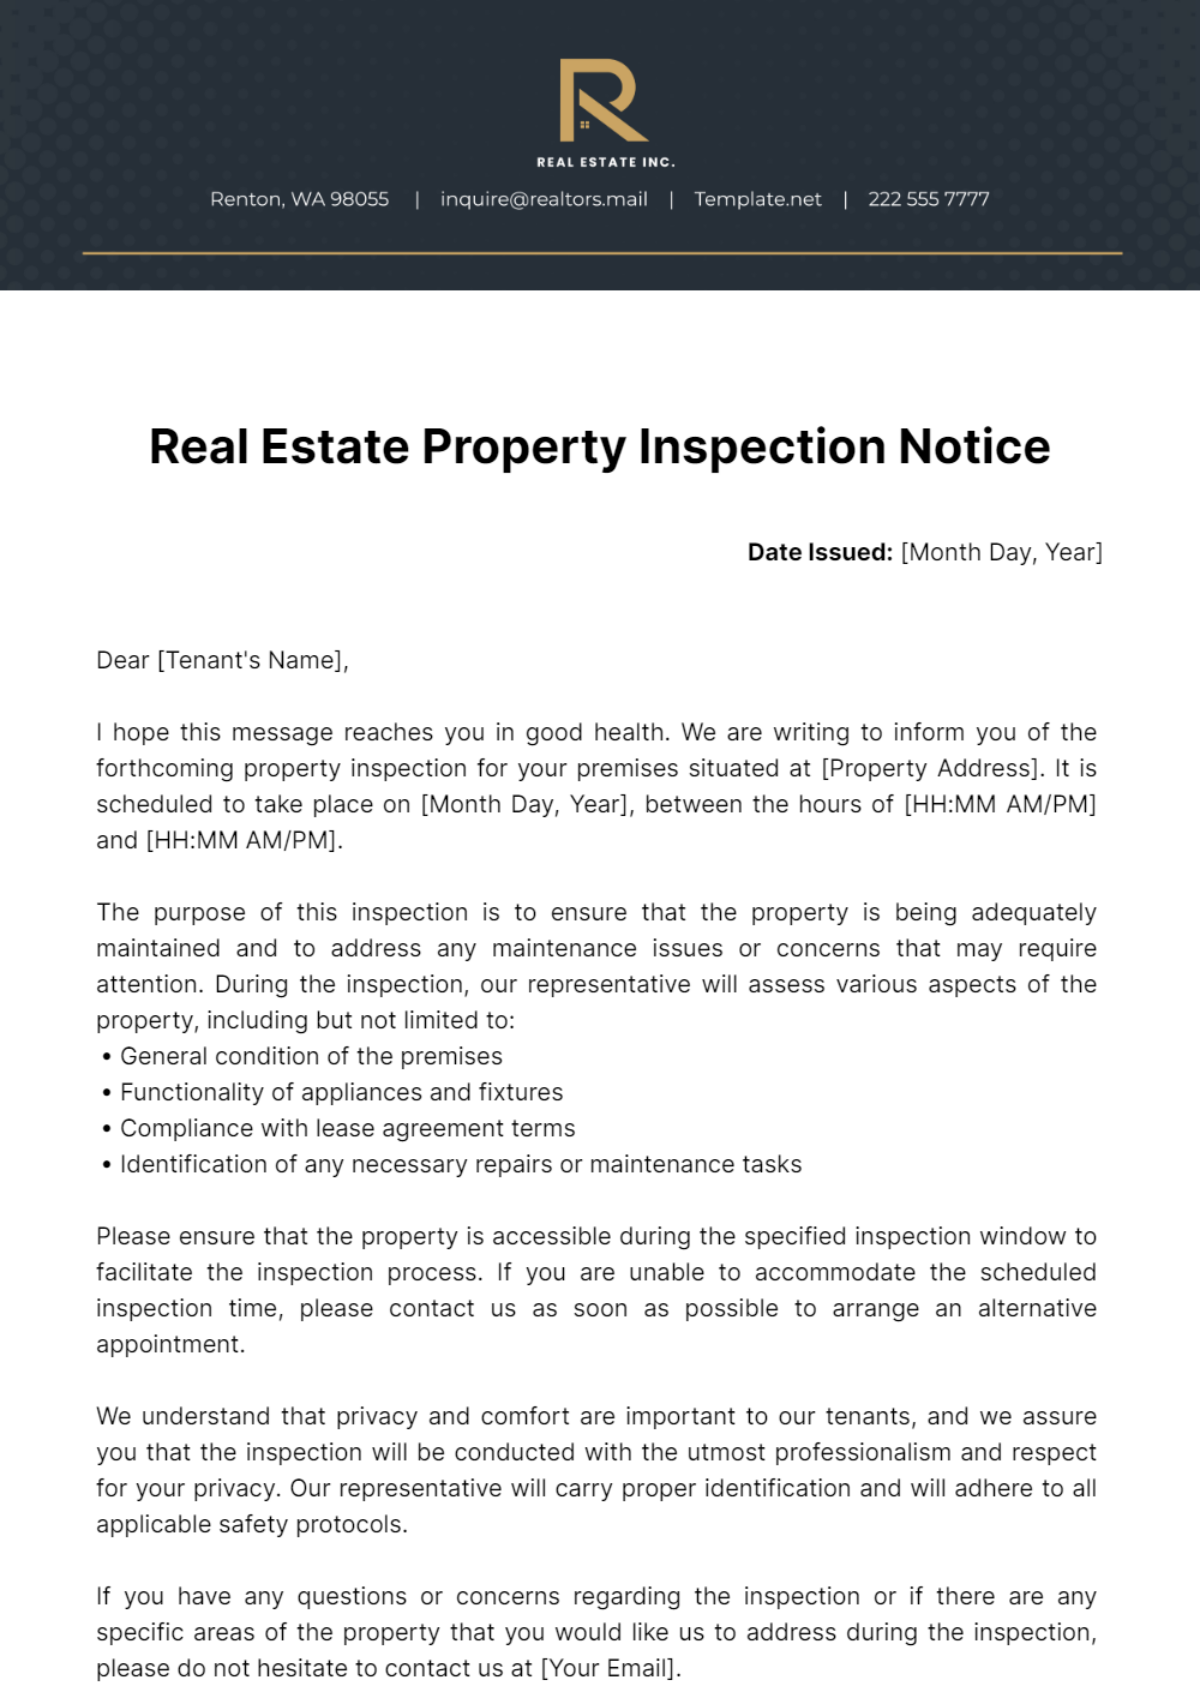 Real Estate Property Inspection Notice Template